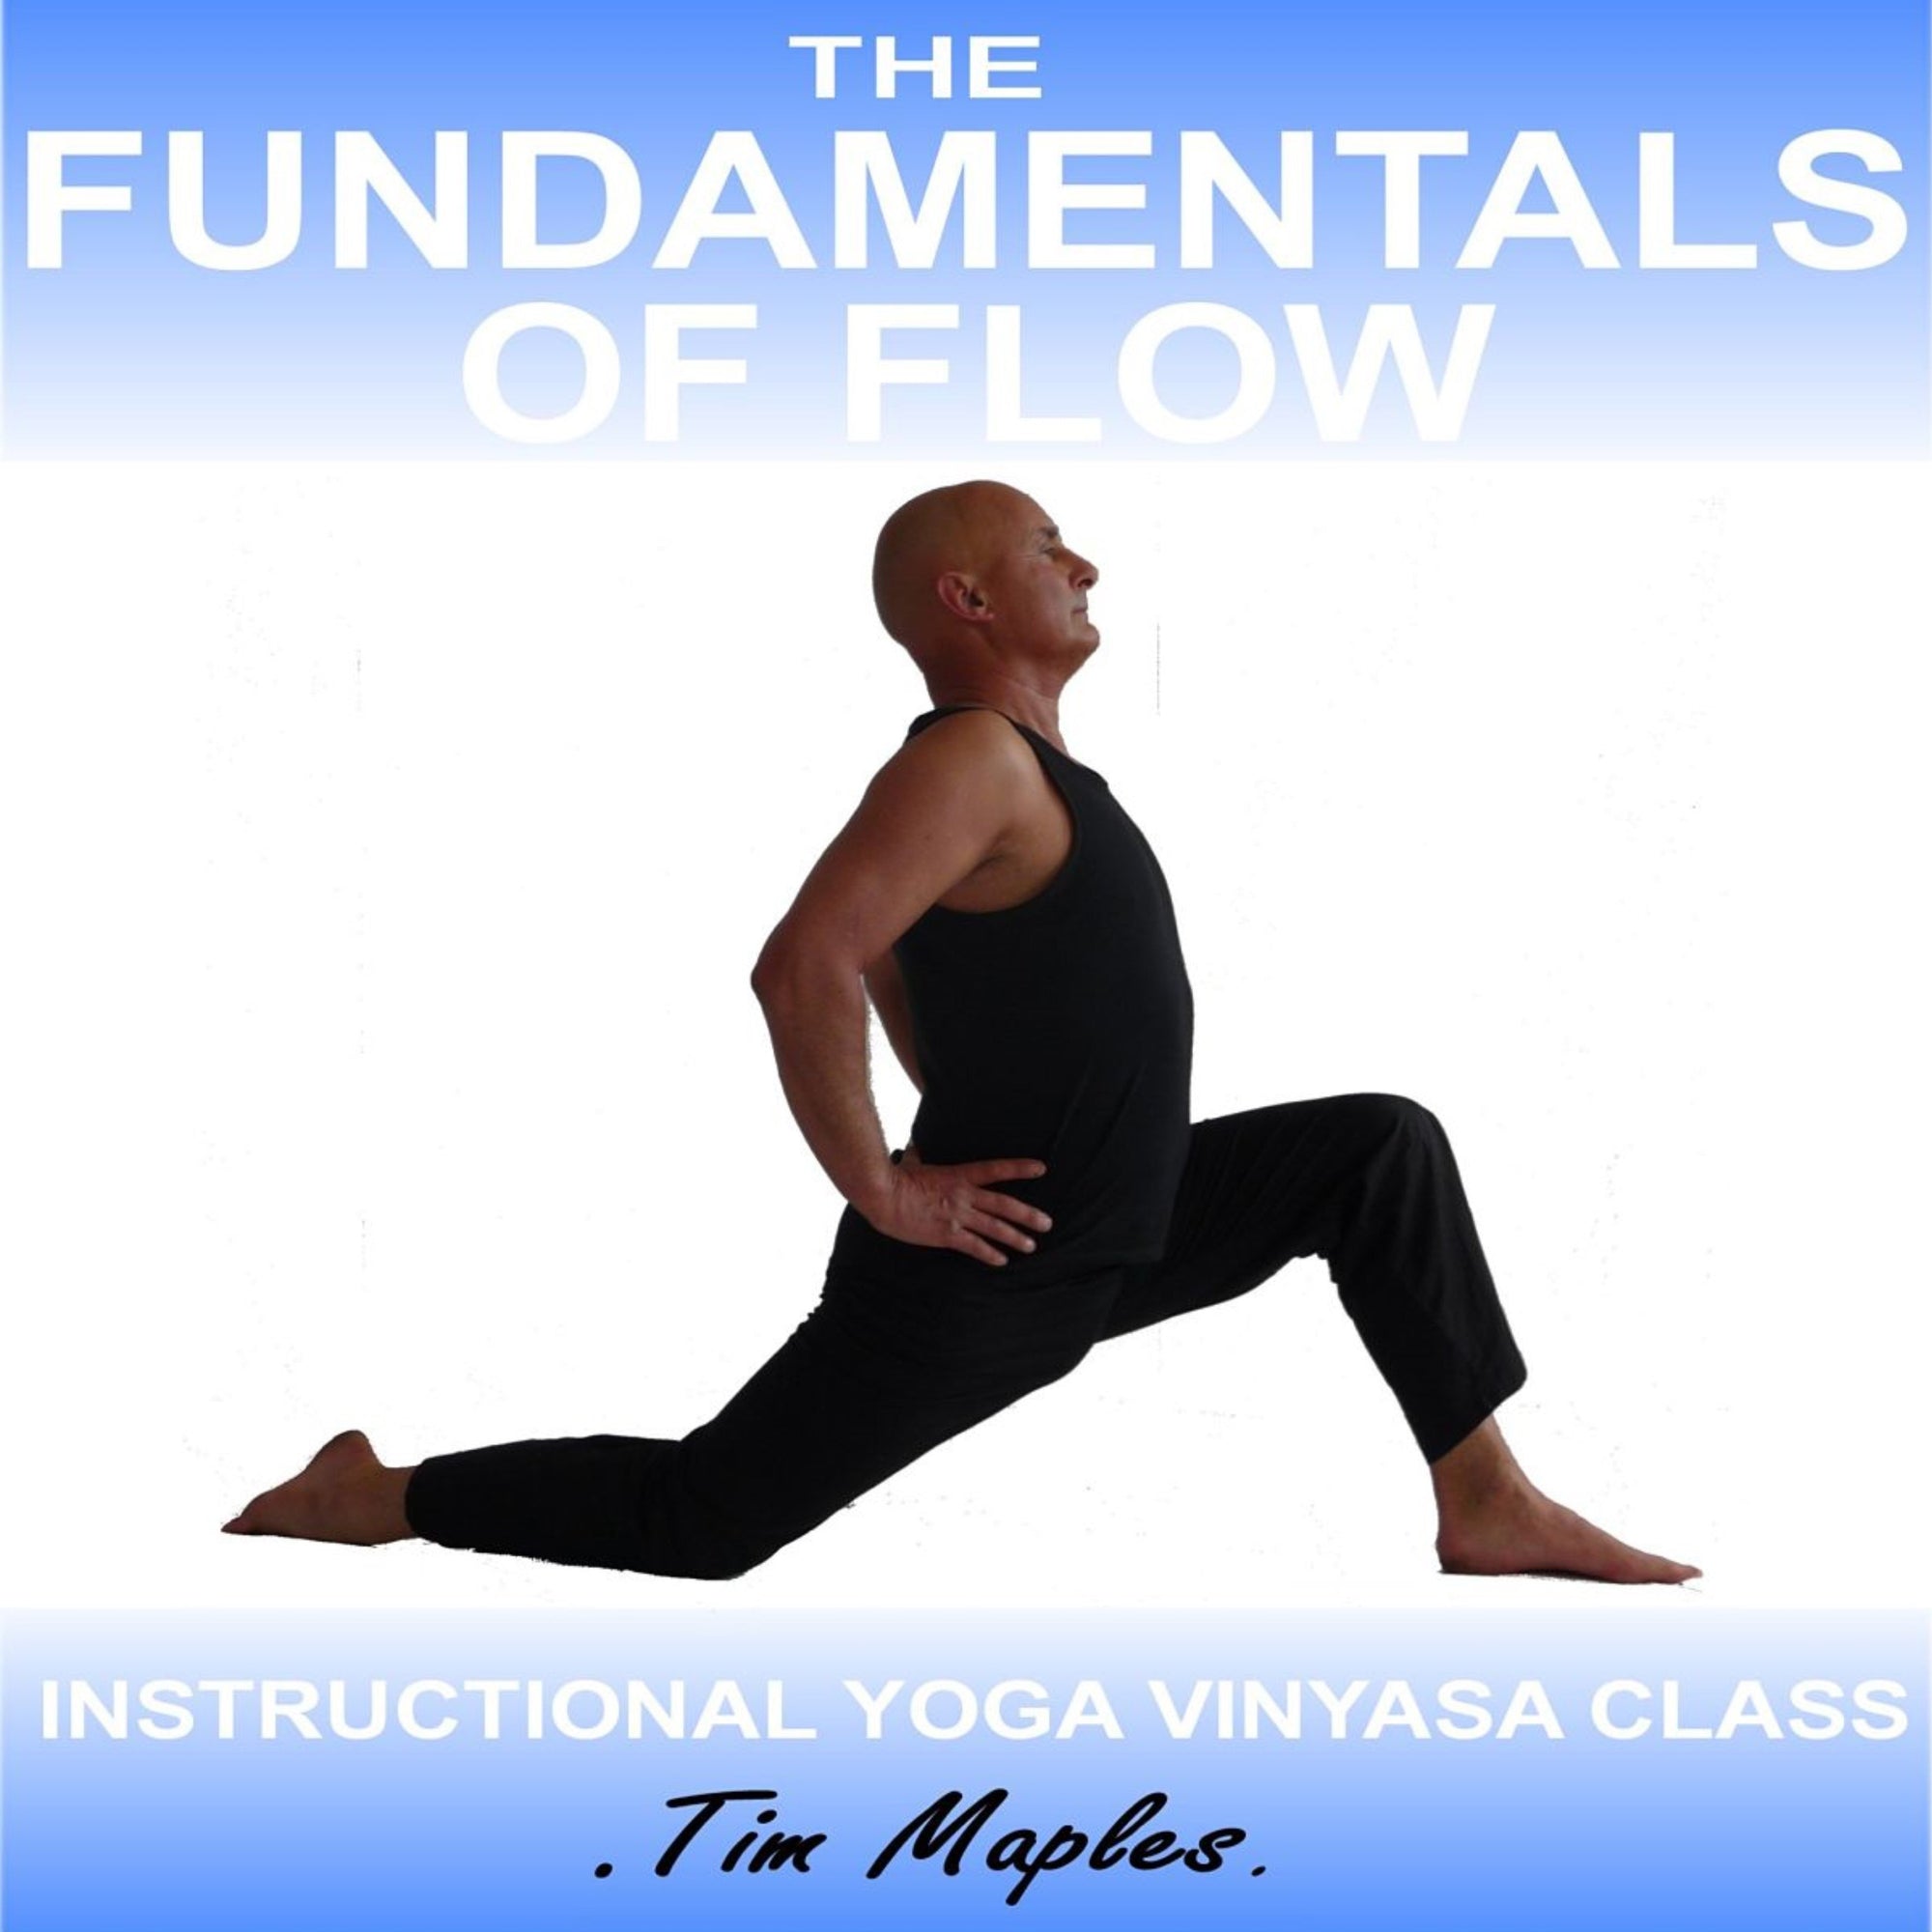 The Fundamentals of Flow